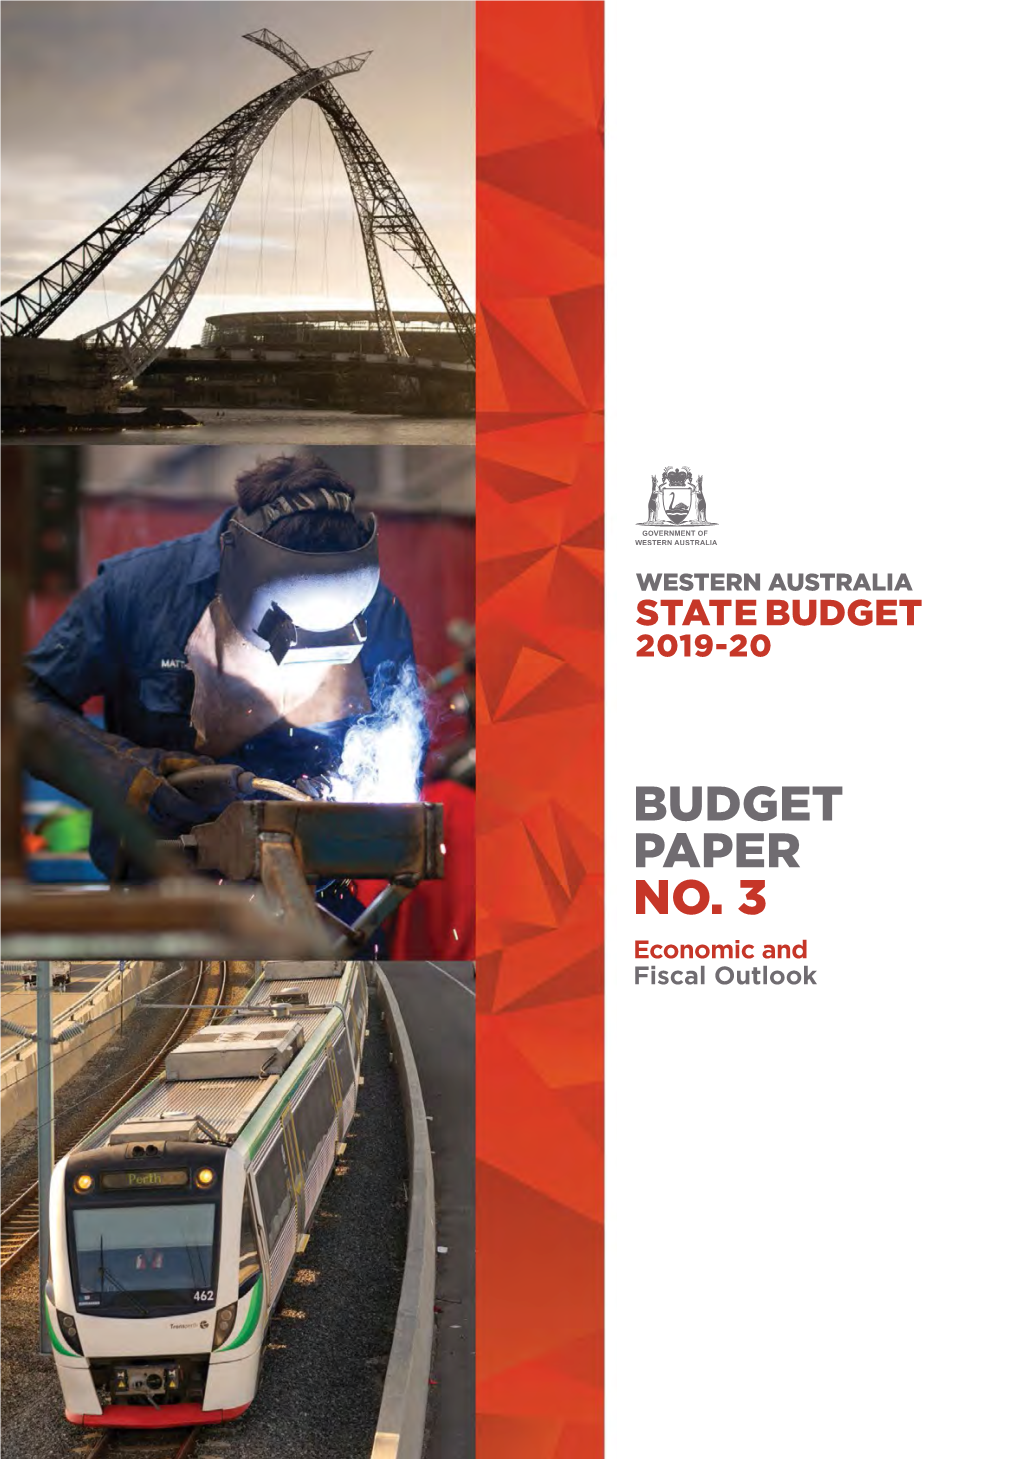 2019-20 Budget. Economic and Fiscal Outlook. Budget